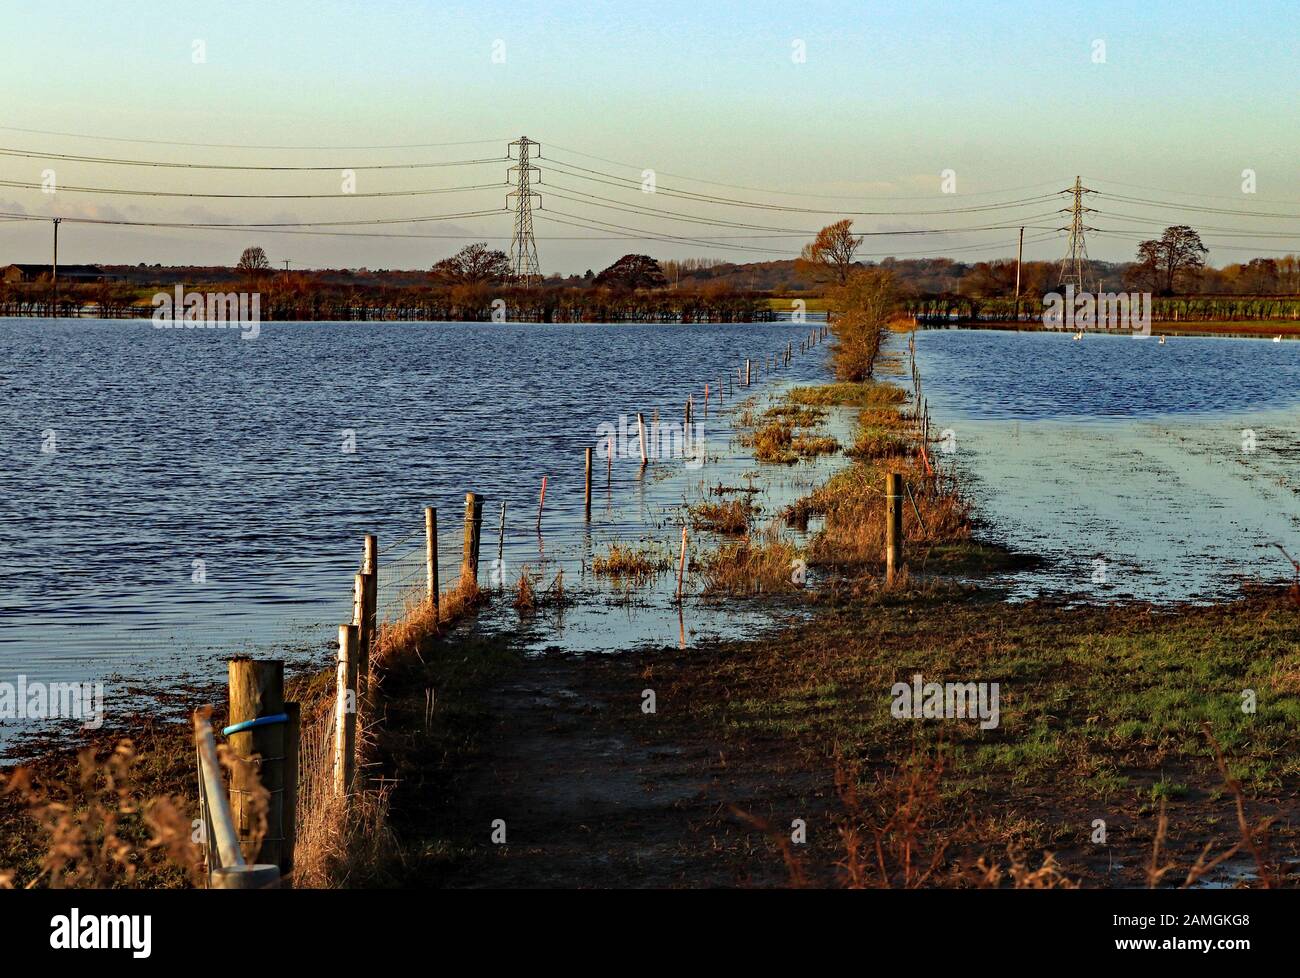 On the West Lancashire plain below Parbold Hill agricultural fields and fences off Mains Lane, Burscough have become flooded in the winter rains. Stock Photo